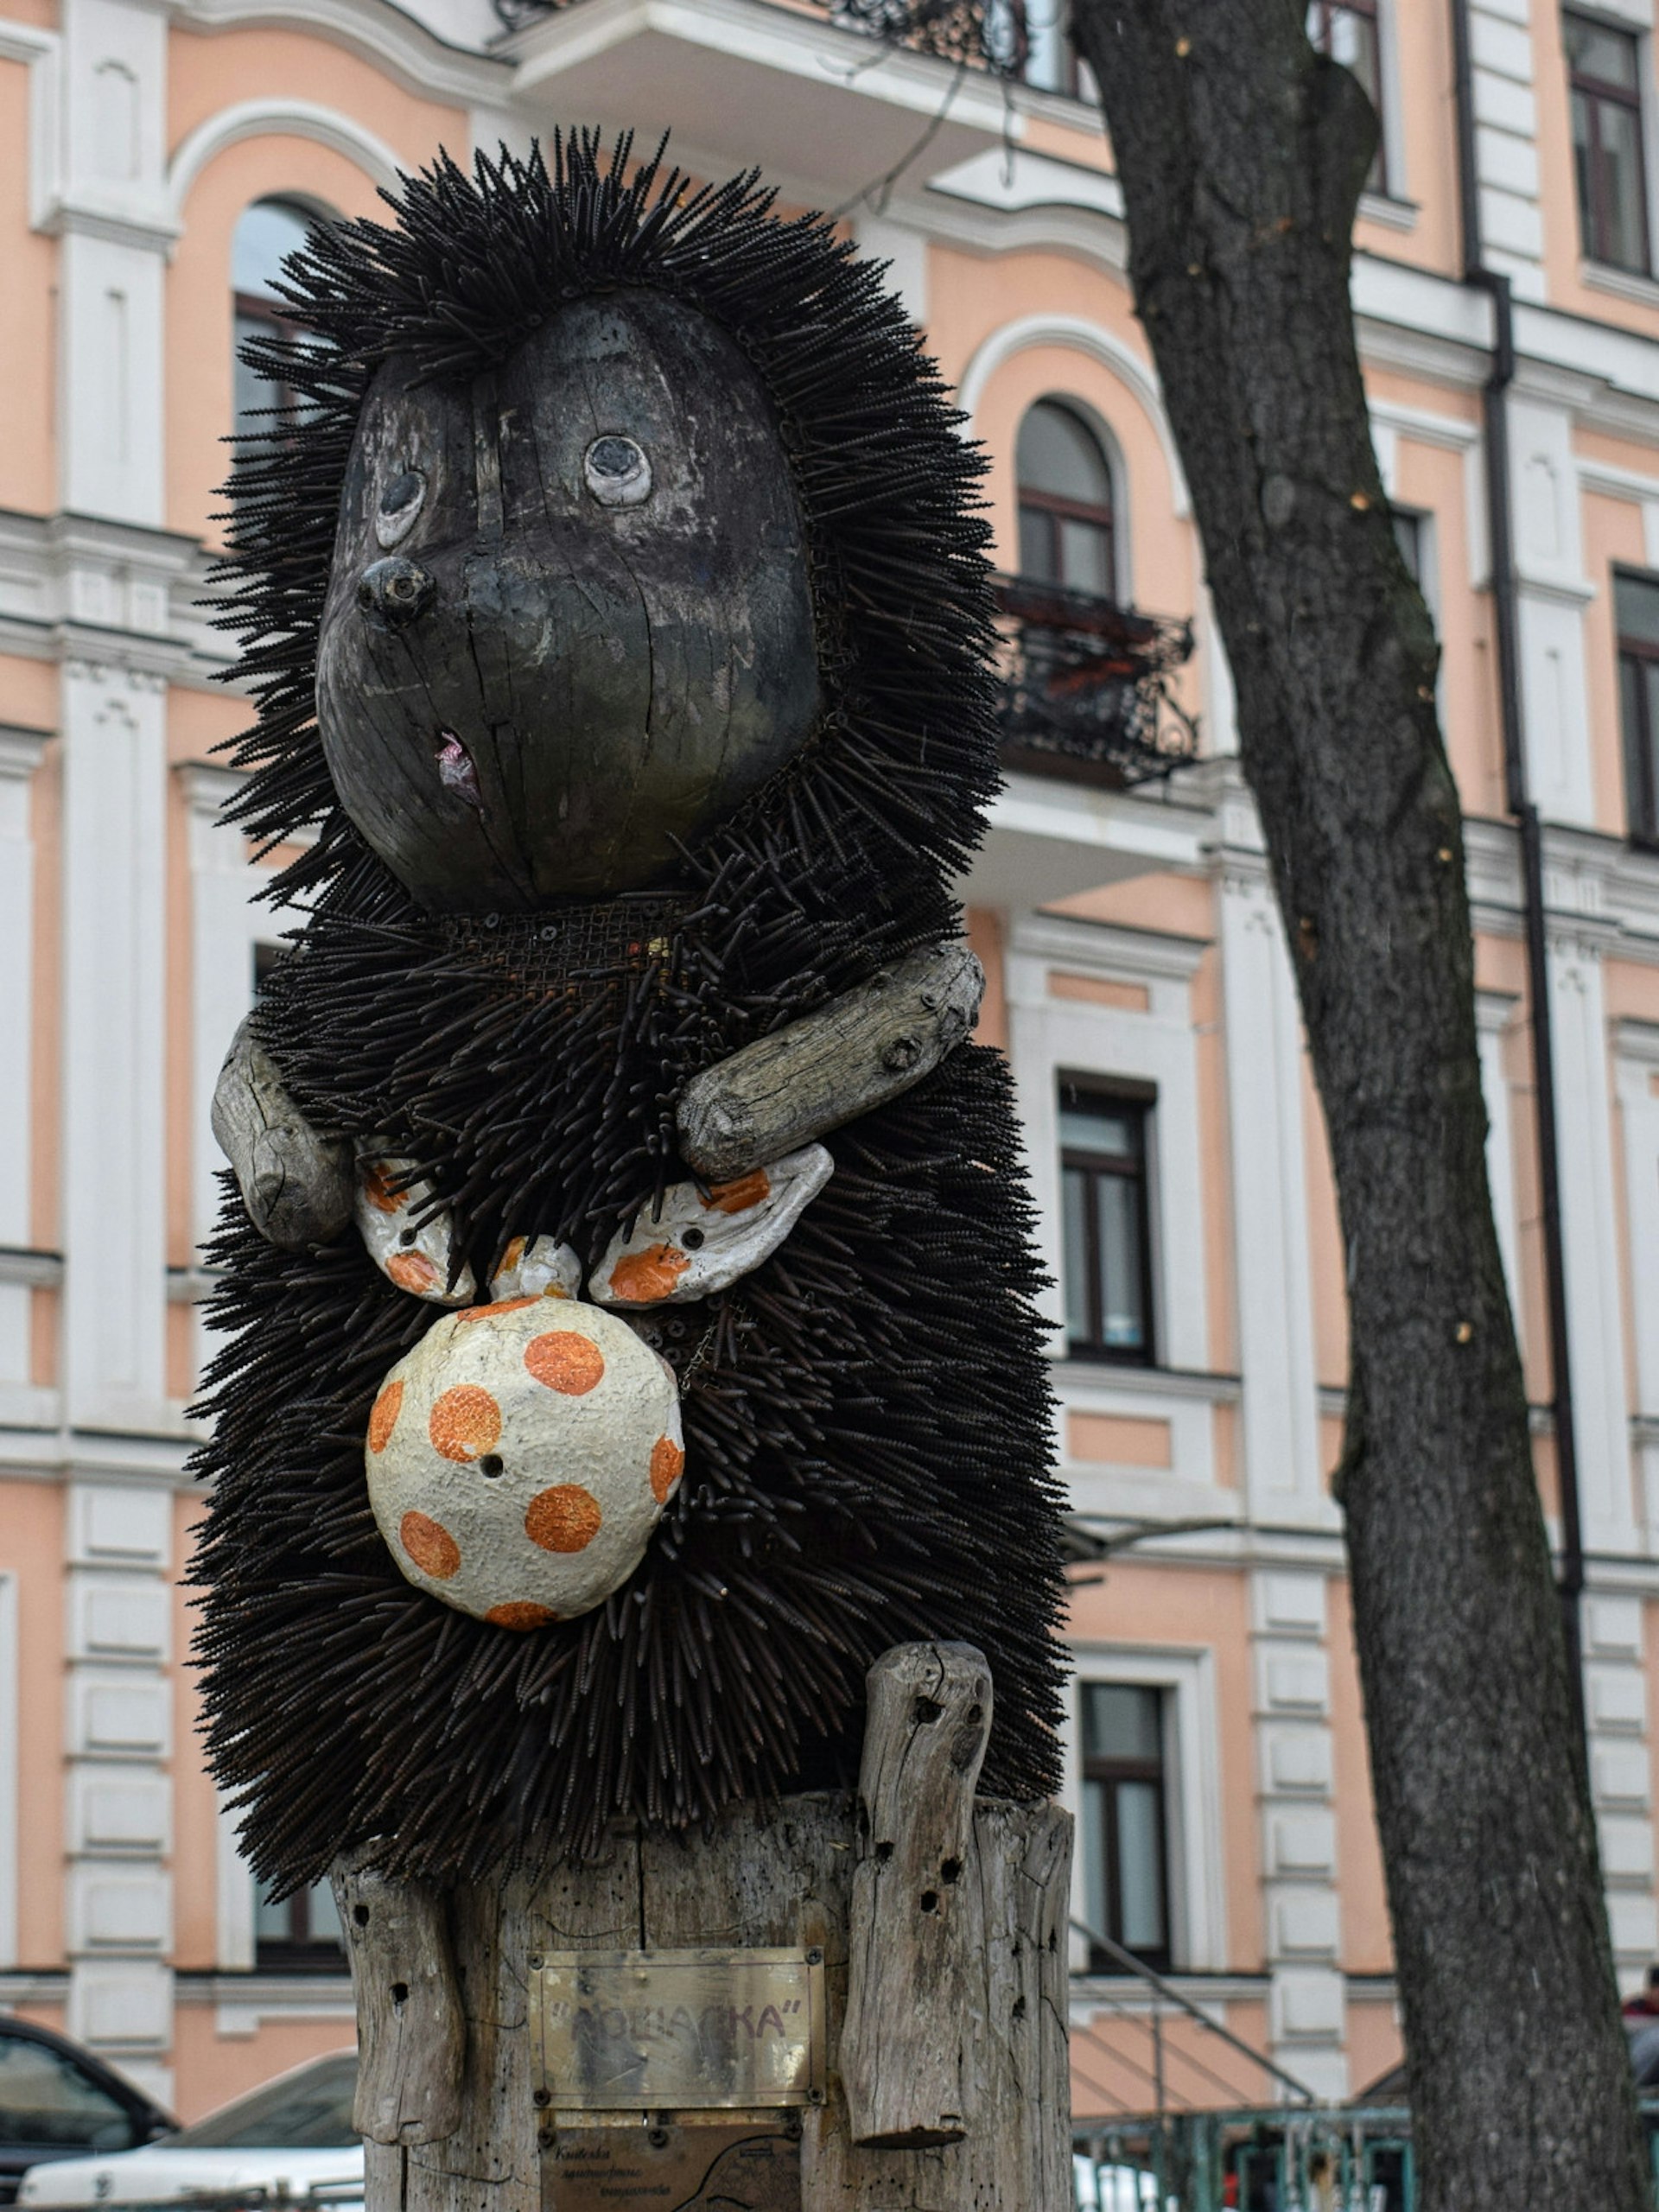 The statue of Hedgehog in the Fog, made of wood and nails © Pavlo Fedykovych / Lonely Planet